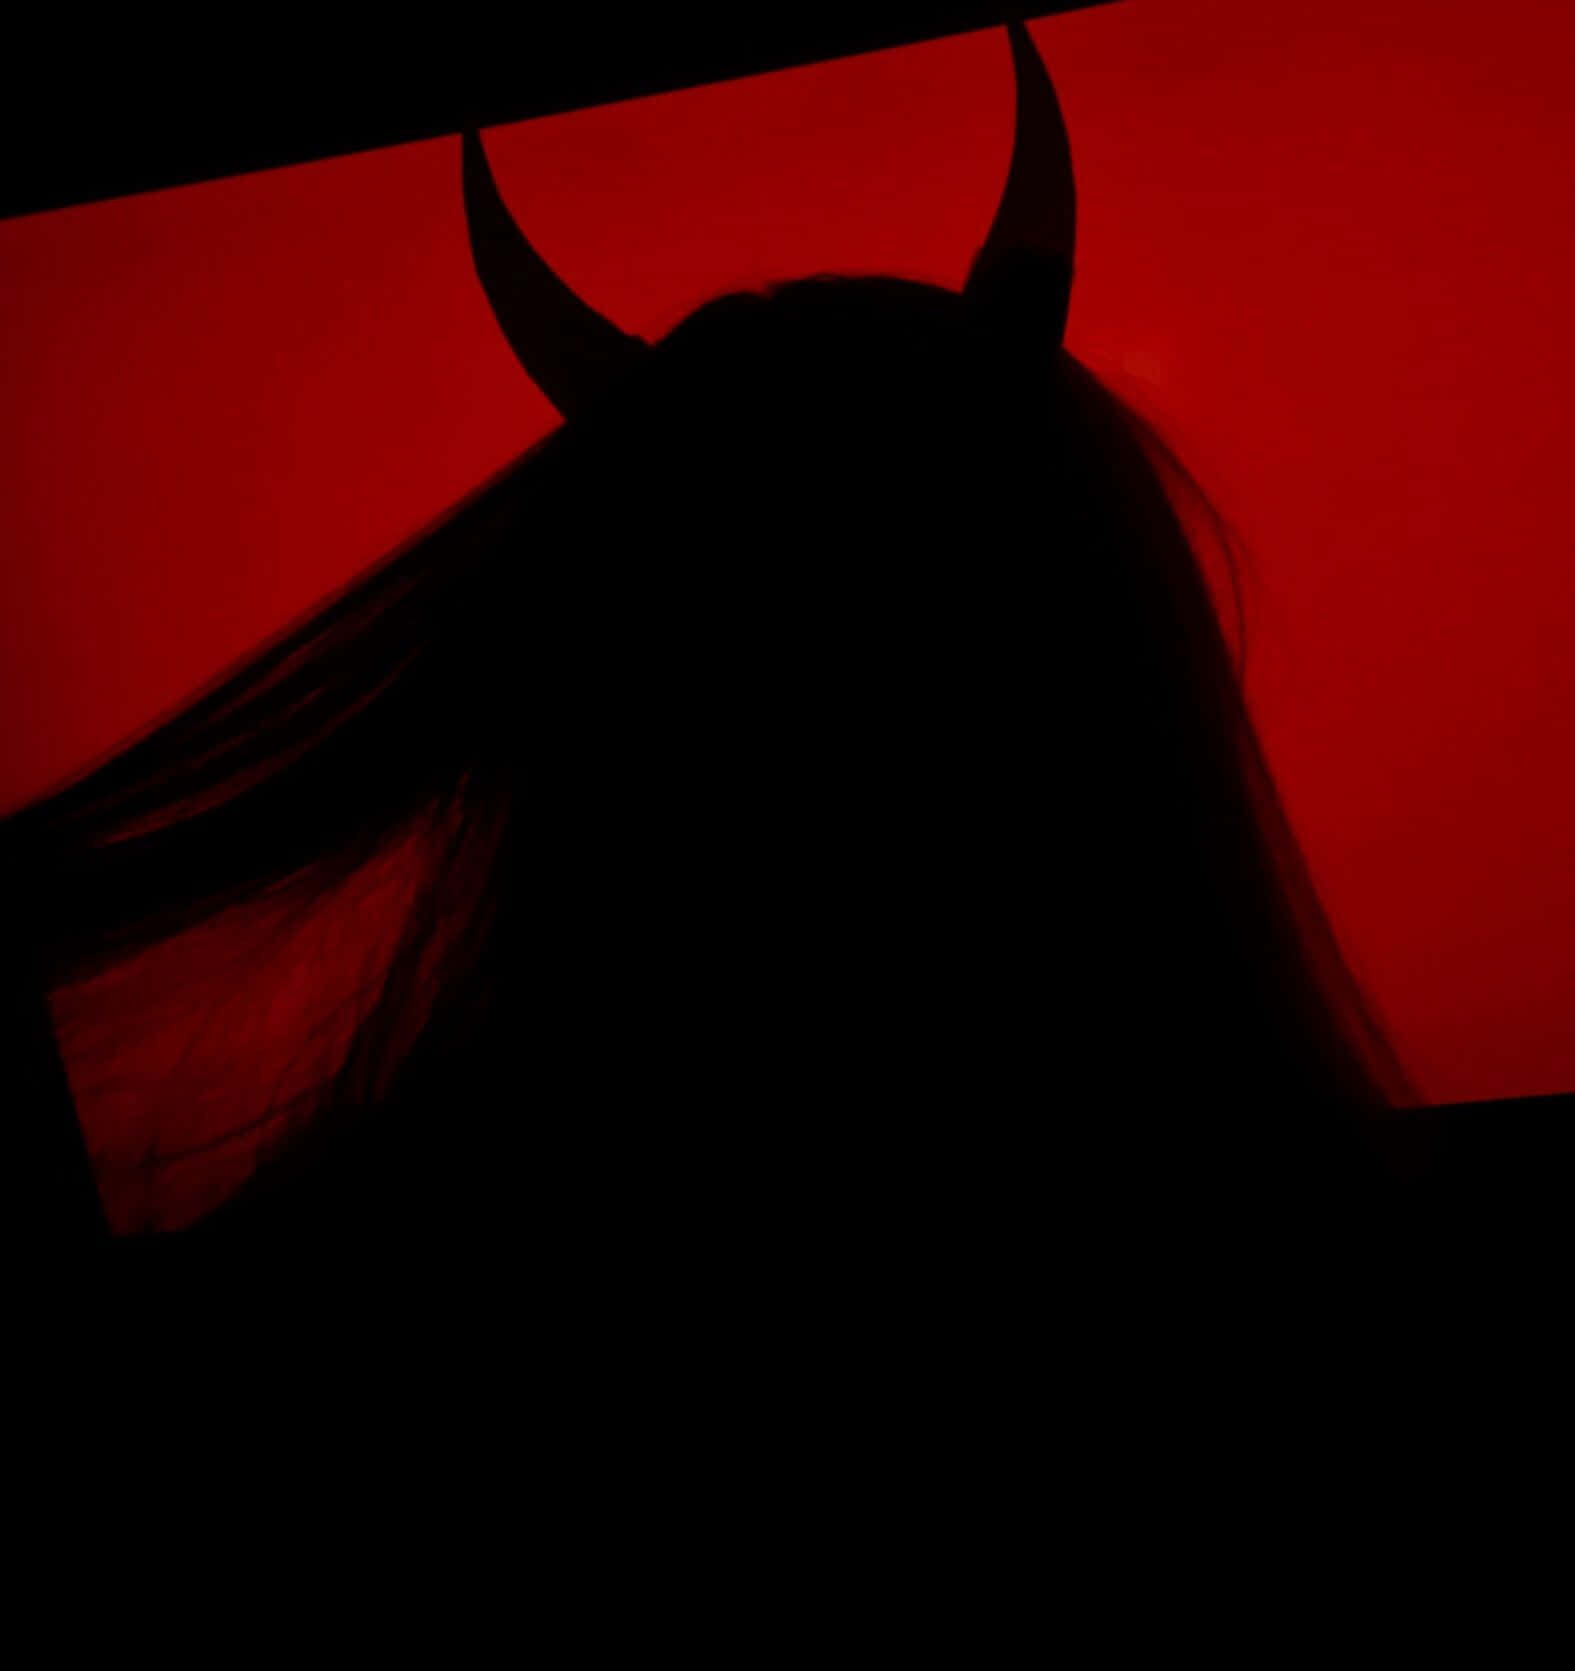 A Woman's Head Is Silhouetted Against A Red Background